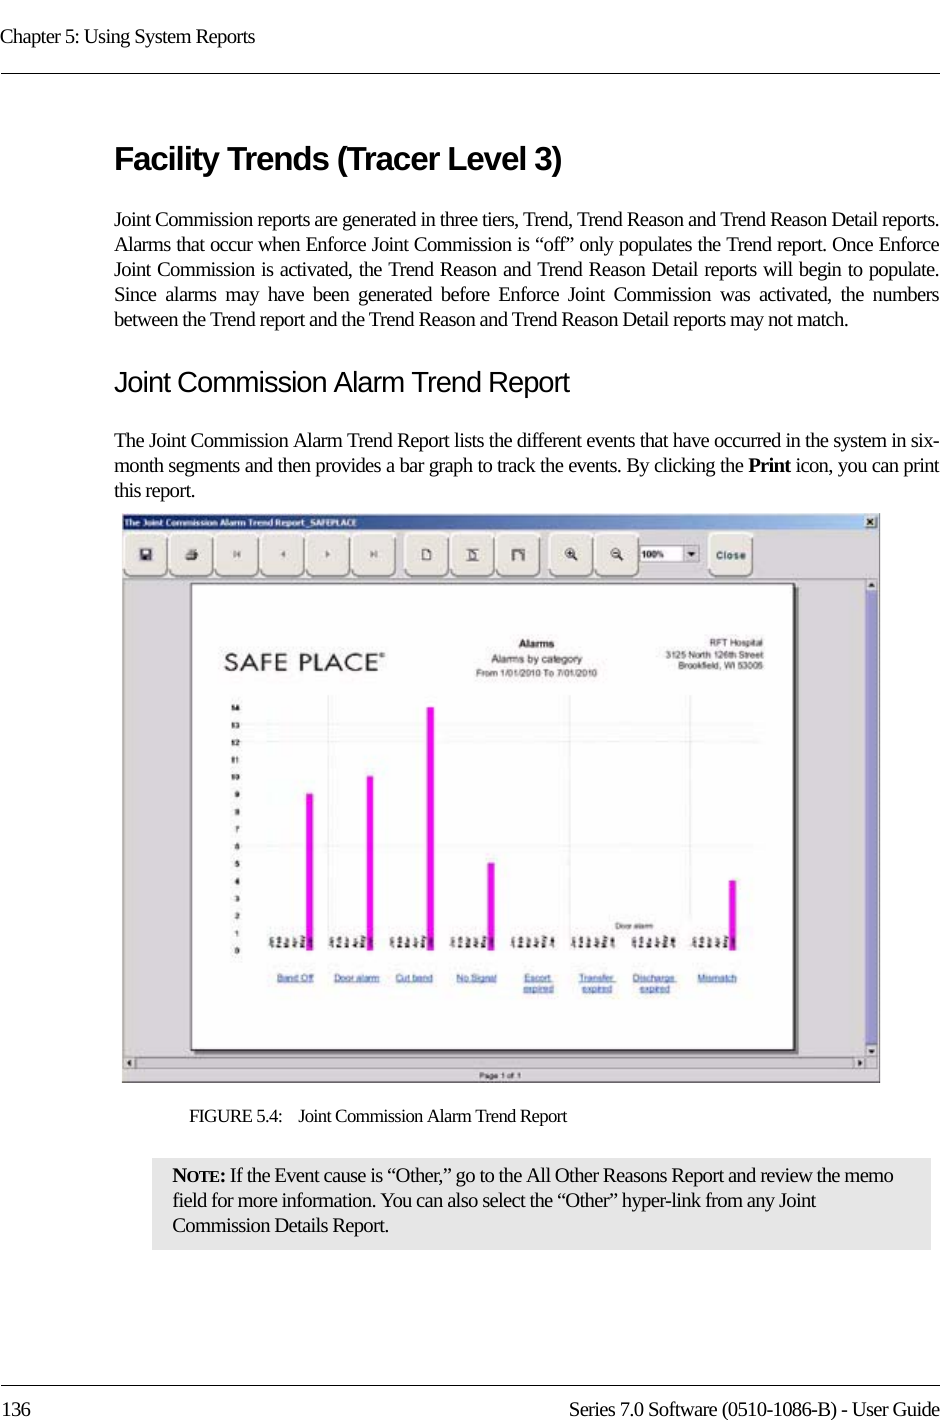 Chapter 5: Using System Reports136 Series 7.0 Software (0510-1086-B) - User GuideFacility Trends (Tracer Level 3)Joint Commission reports are generated in three tiers, Trend, Trend Reason and Trend Reason Detail reports. Alarms that occur when Enforce Joint Commission is “off” only populates the Trend report. Once Enforce Joint Commission is activated, the Trend Reason and Trend Reason Detail reports will begin to populate. Since alarms may have been generated before Enforce Joint Commission was activated, the numbers between the Trend report and the Trend Reason and Trend Reason Detail reports may not match. Joint Commission Alarm Trend ReportThe Joint Commission Alarm Trend Report lists the different events that have occurred in the system in six-month segments and then provides a bar graph to track the events. By clicking the Print icon, you can print this report. FIGURE 5.4:    Joint Commission Alarm Trend ReportNOTE: If the Event cause is “Other,” go to the All Other Reasons Report and review the memo field for more information. You can also select the “Other” hyper-link from any Joint Commission Details Report.